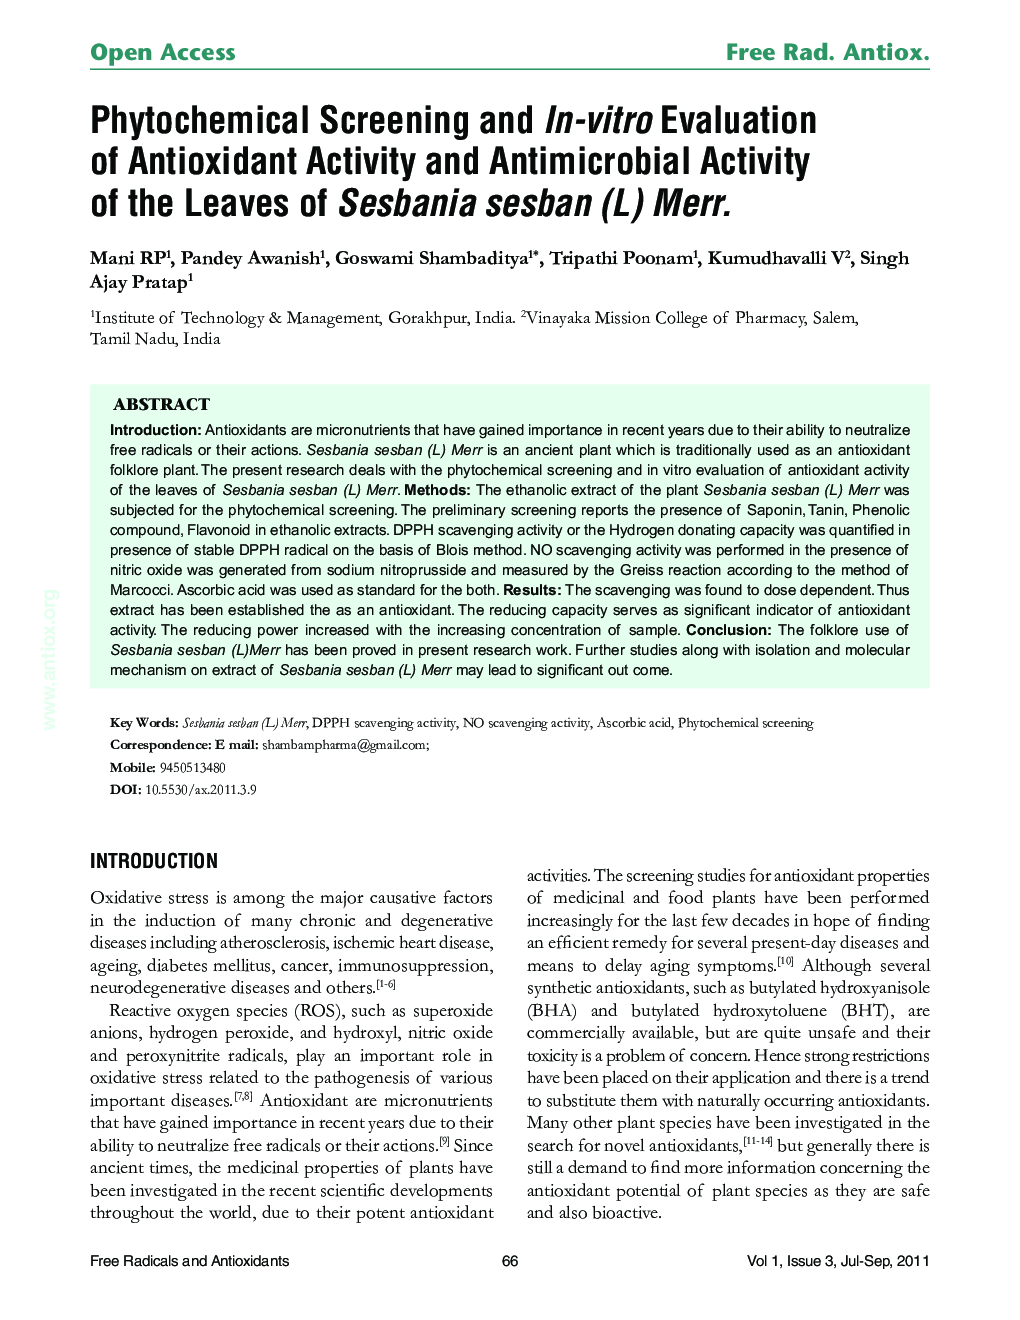 Phytochemical Screening and In-vitro Evaluation of Antioxidant Activity and Antimicrobial Activity of the Leaves of Sesbania sesban (L) Merr.